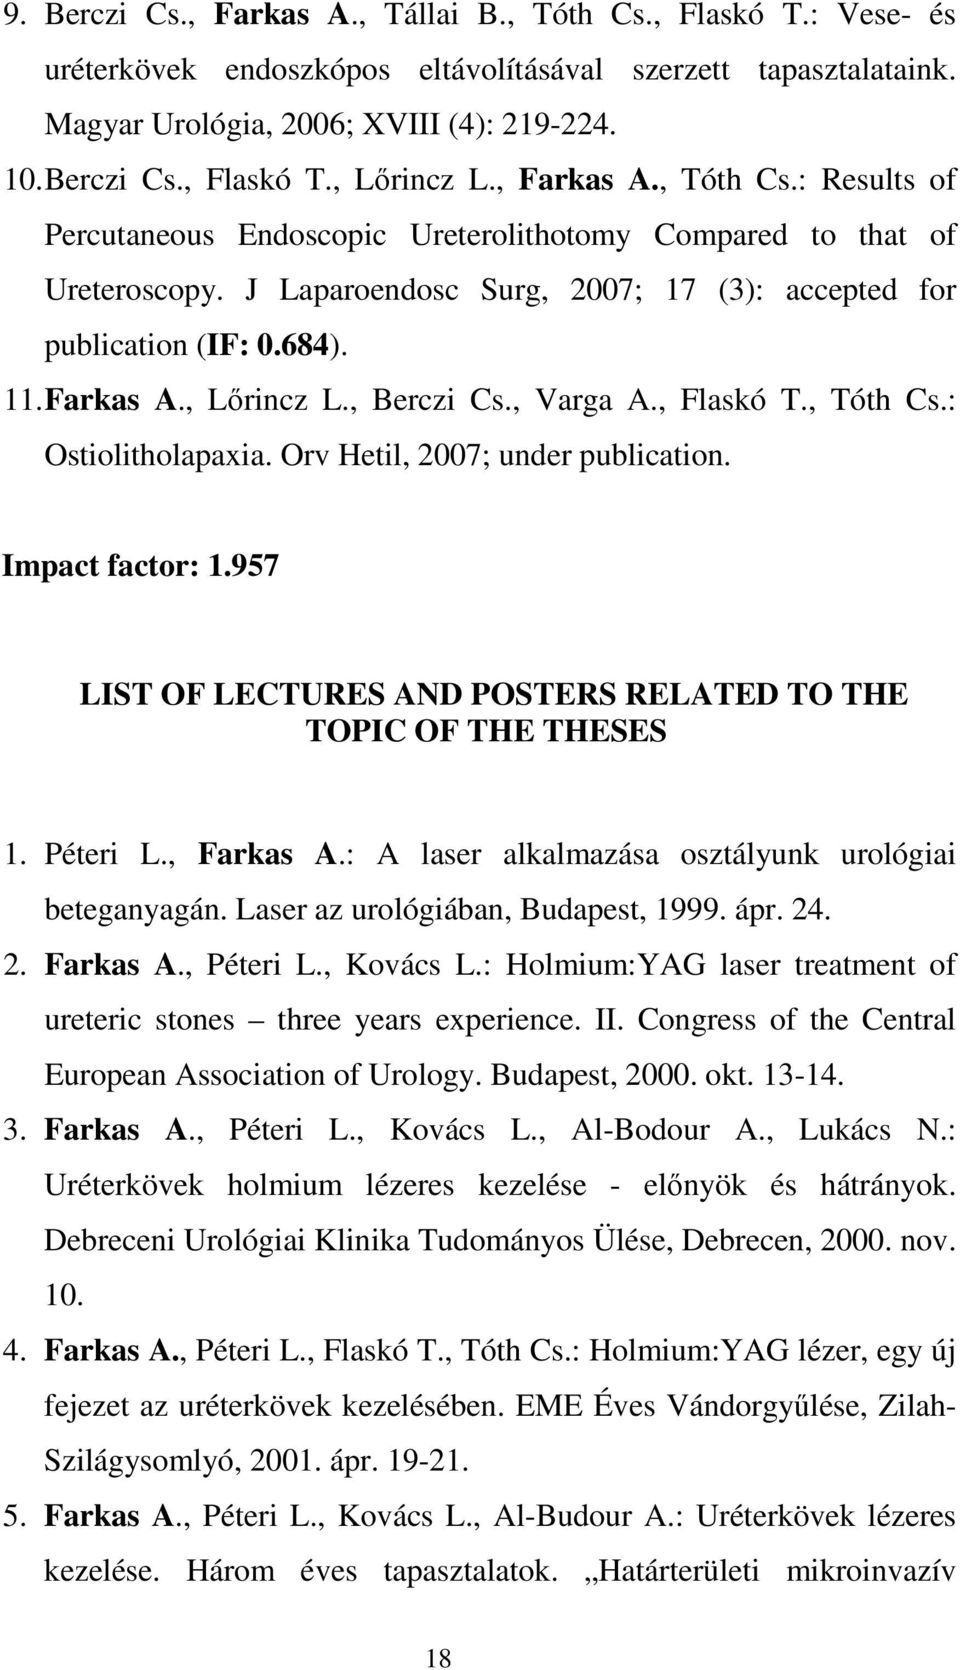 , Berczi Cs., Varga A., Flaskó T., Tóth Cs.: Ostiolitholapaxia. Orv Hetil, 2007; under publication. Impact factor: 1.957 LIST OF LECTURES AND POSTERS RELATED TO THE TOPIC OF THE THESES 1. Péteri L.